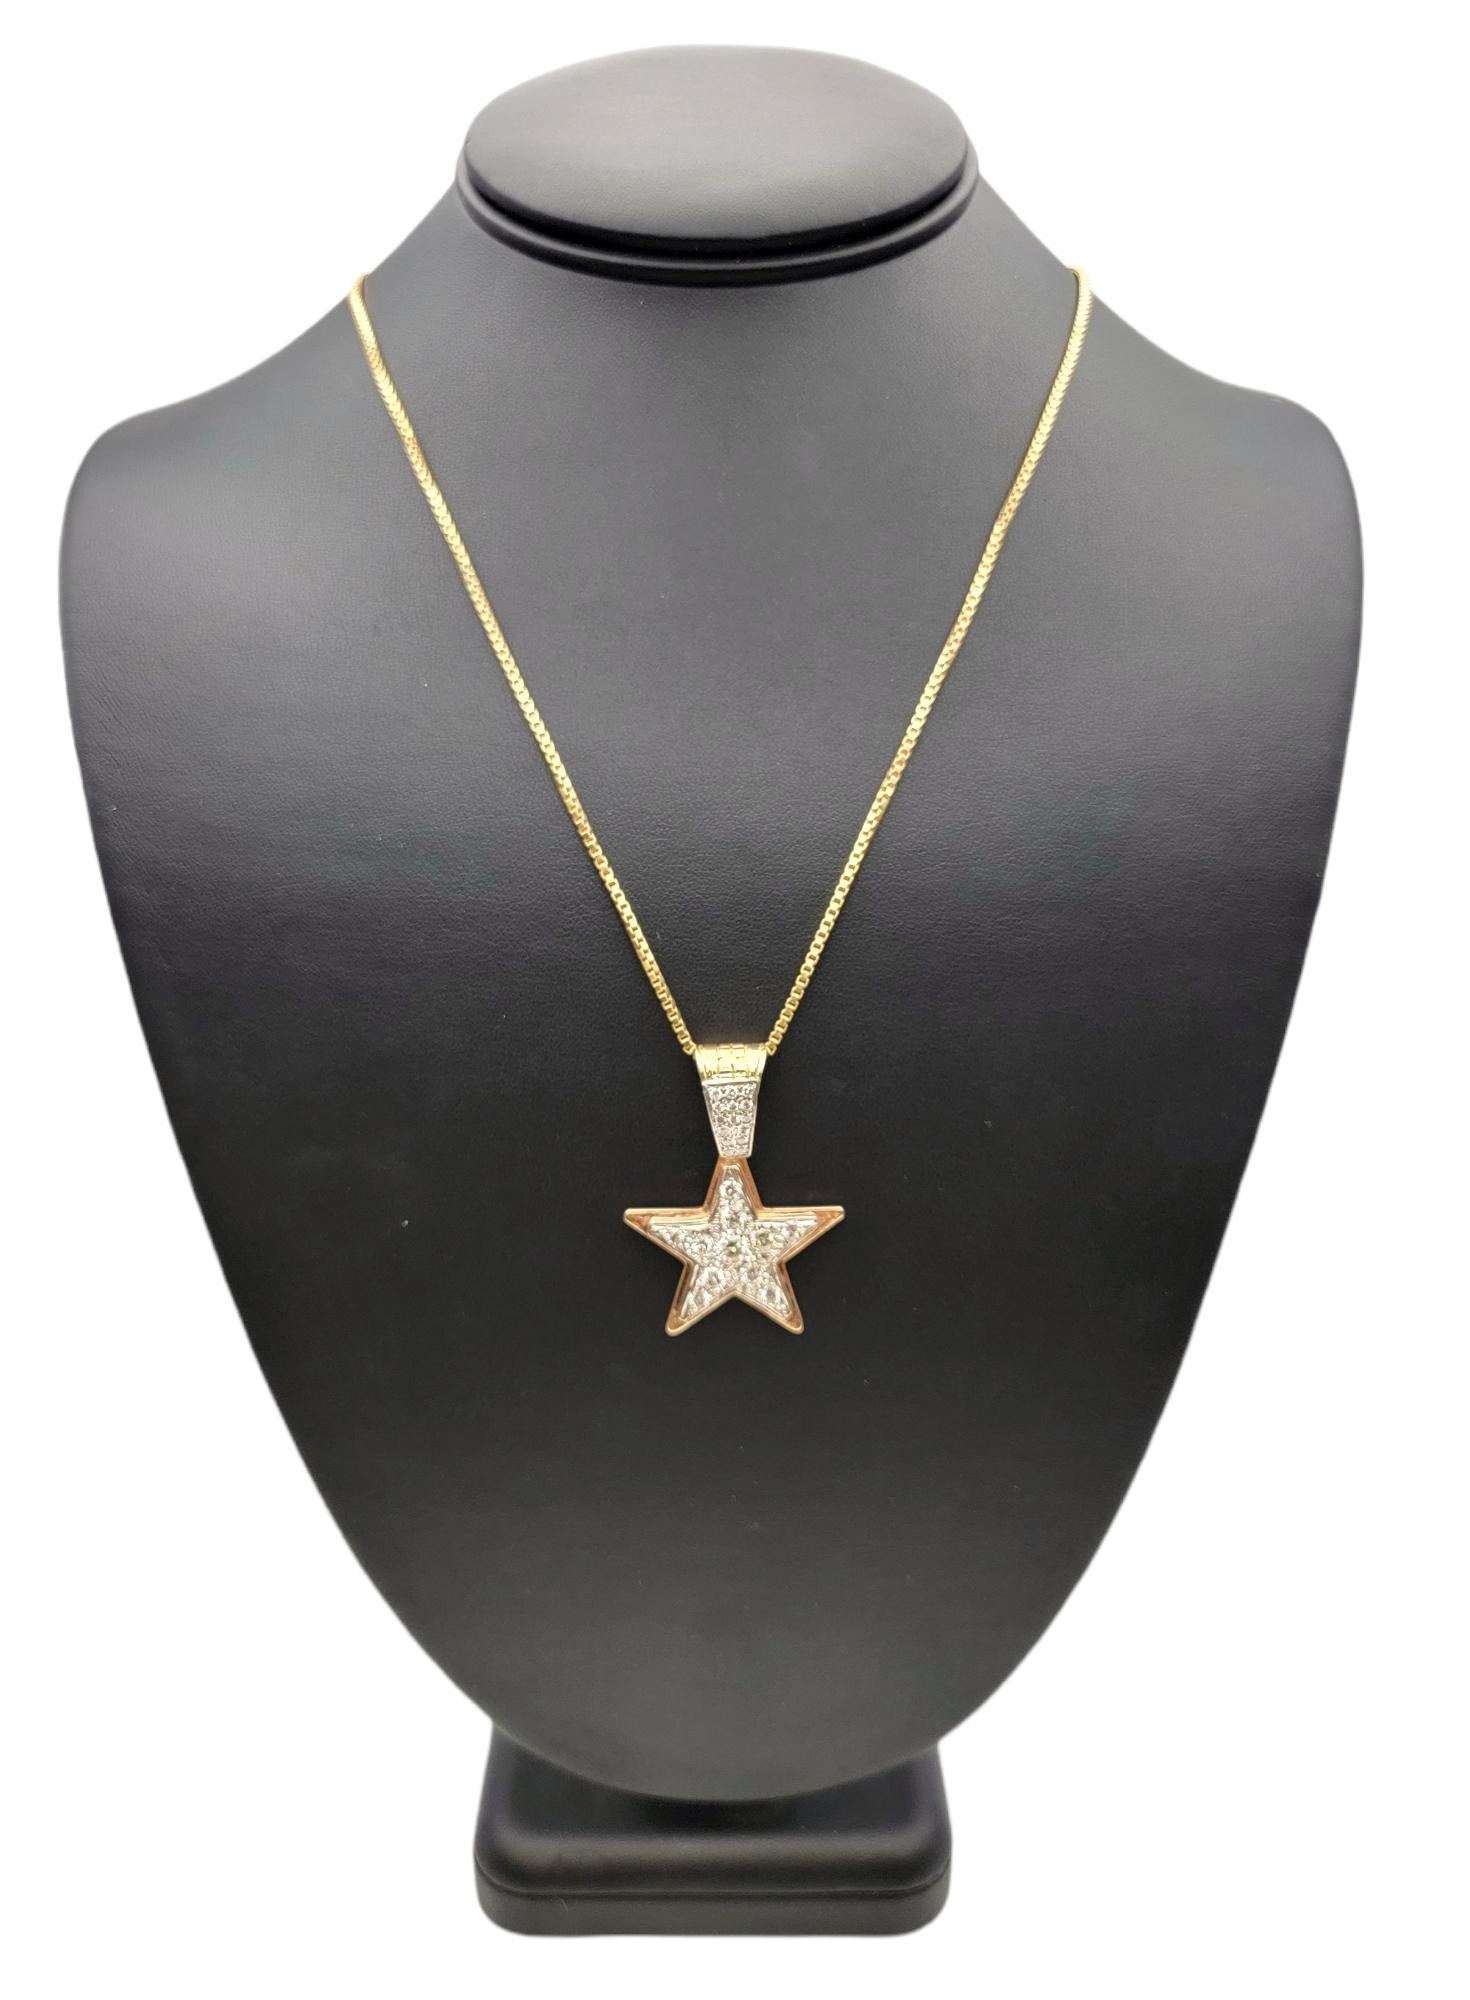 2.32 Carats Total Round Diamond Star Pendant in 14 Karat Yellow and White Gold In Good Condition For Sale In Scottsdale, AZ